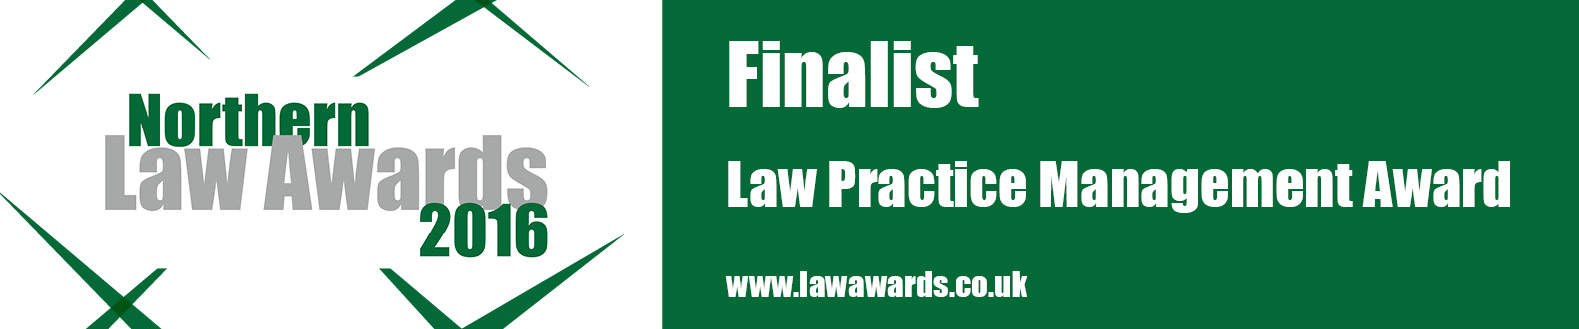 We’ve been shortlisted for a Northern Law Award!